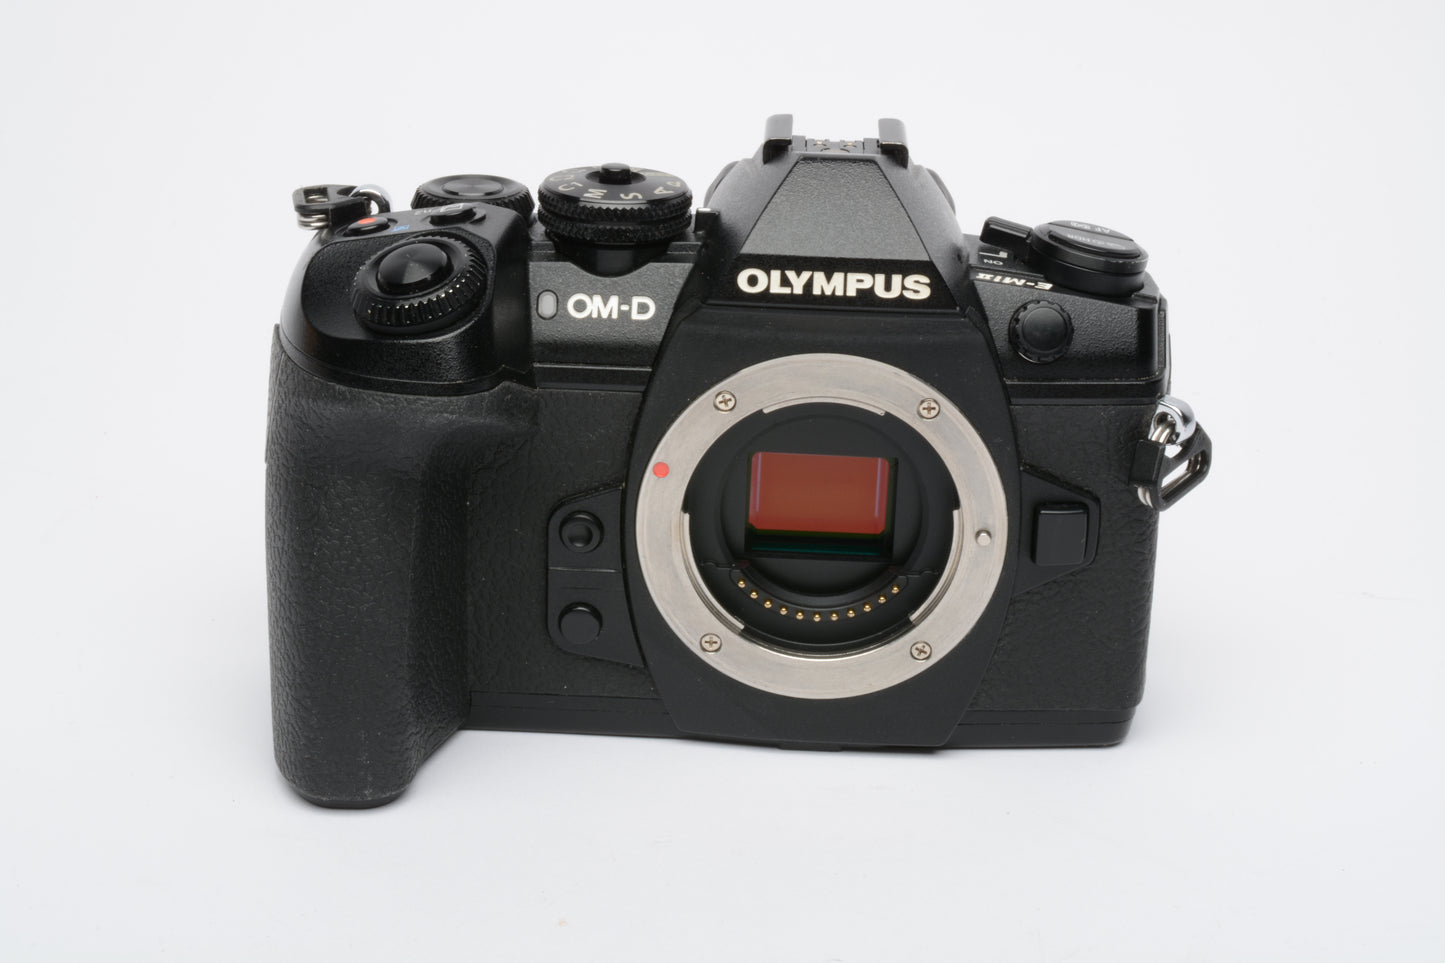 Olympus OM-D E-M1 Mark II Mirrorless Micro 4/3  Body, 106K Acts, nice, tested